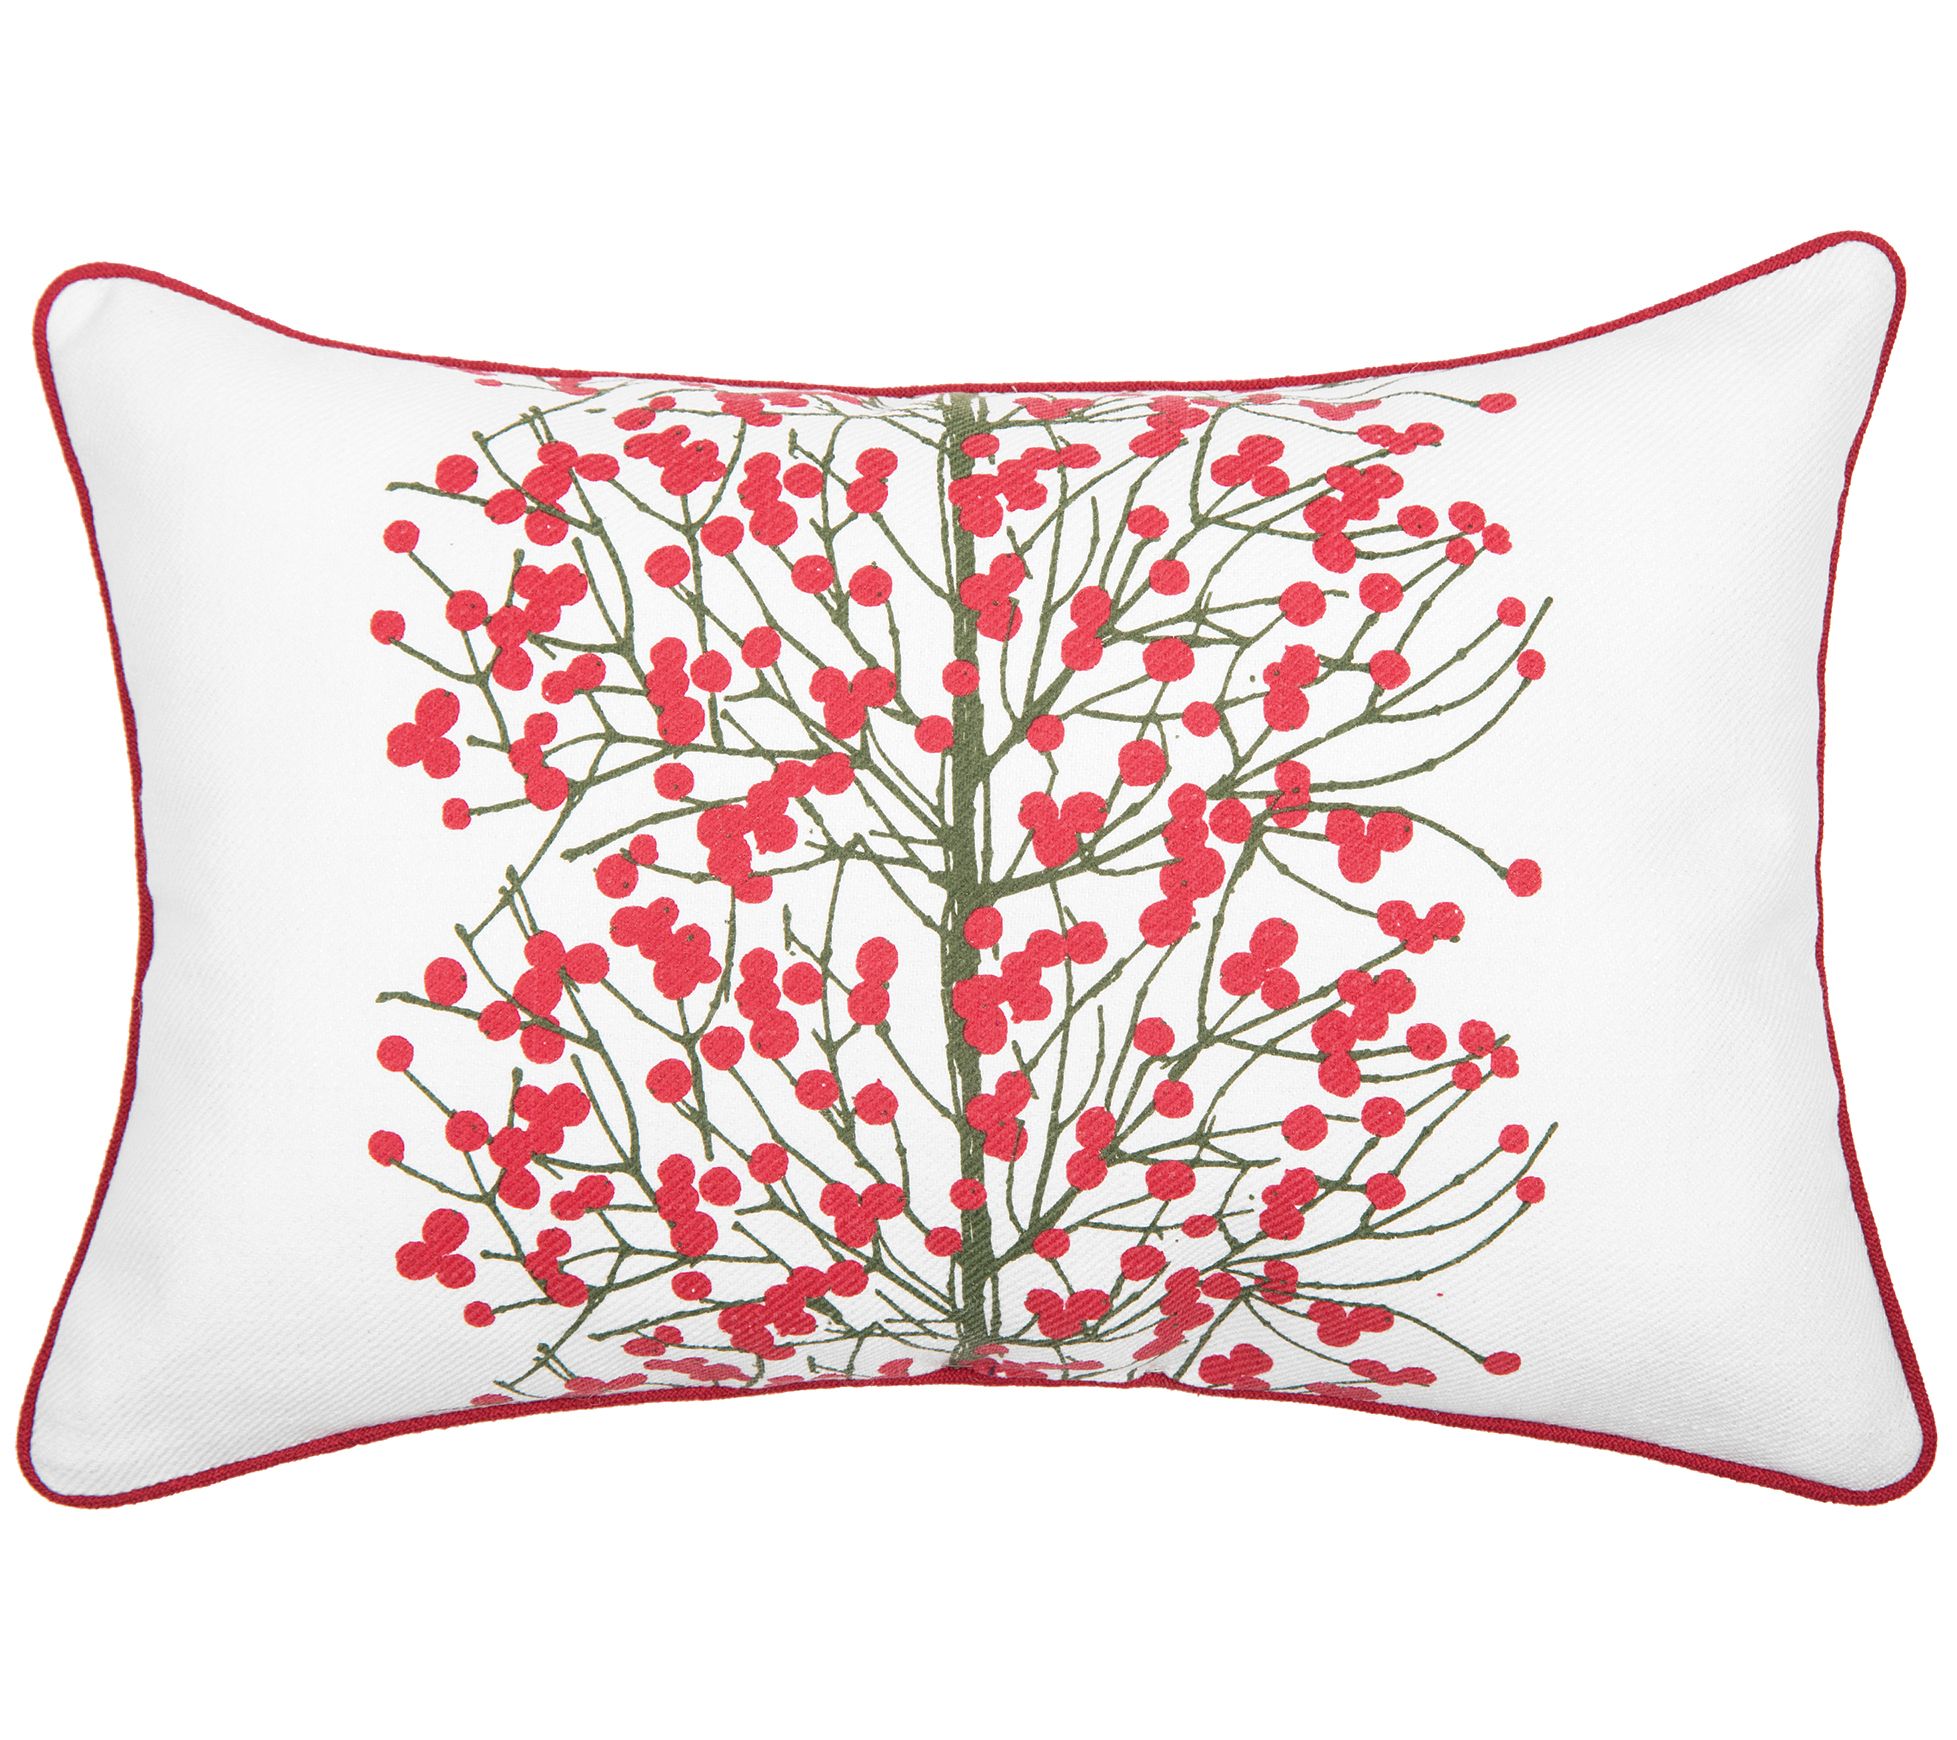 Snowy Trees Pillow by C&F Home